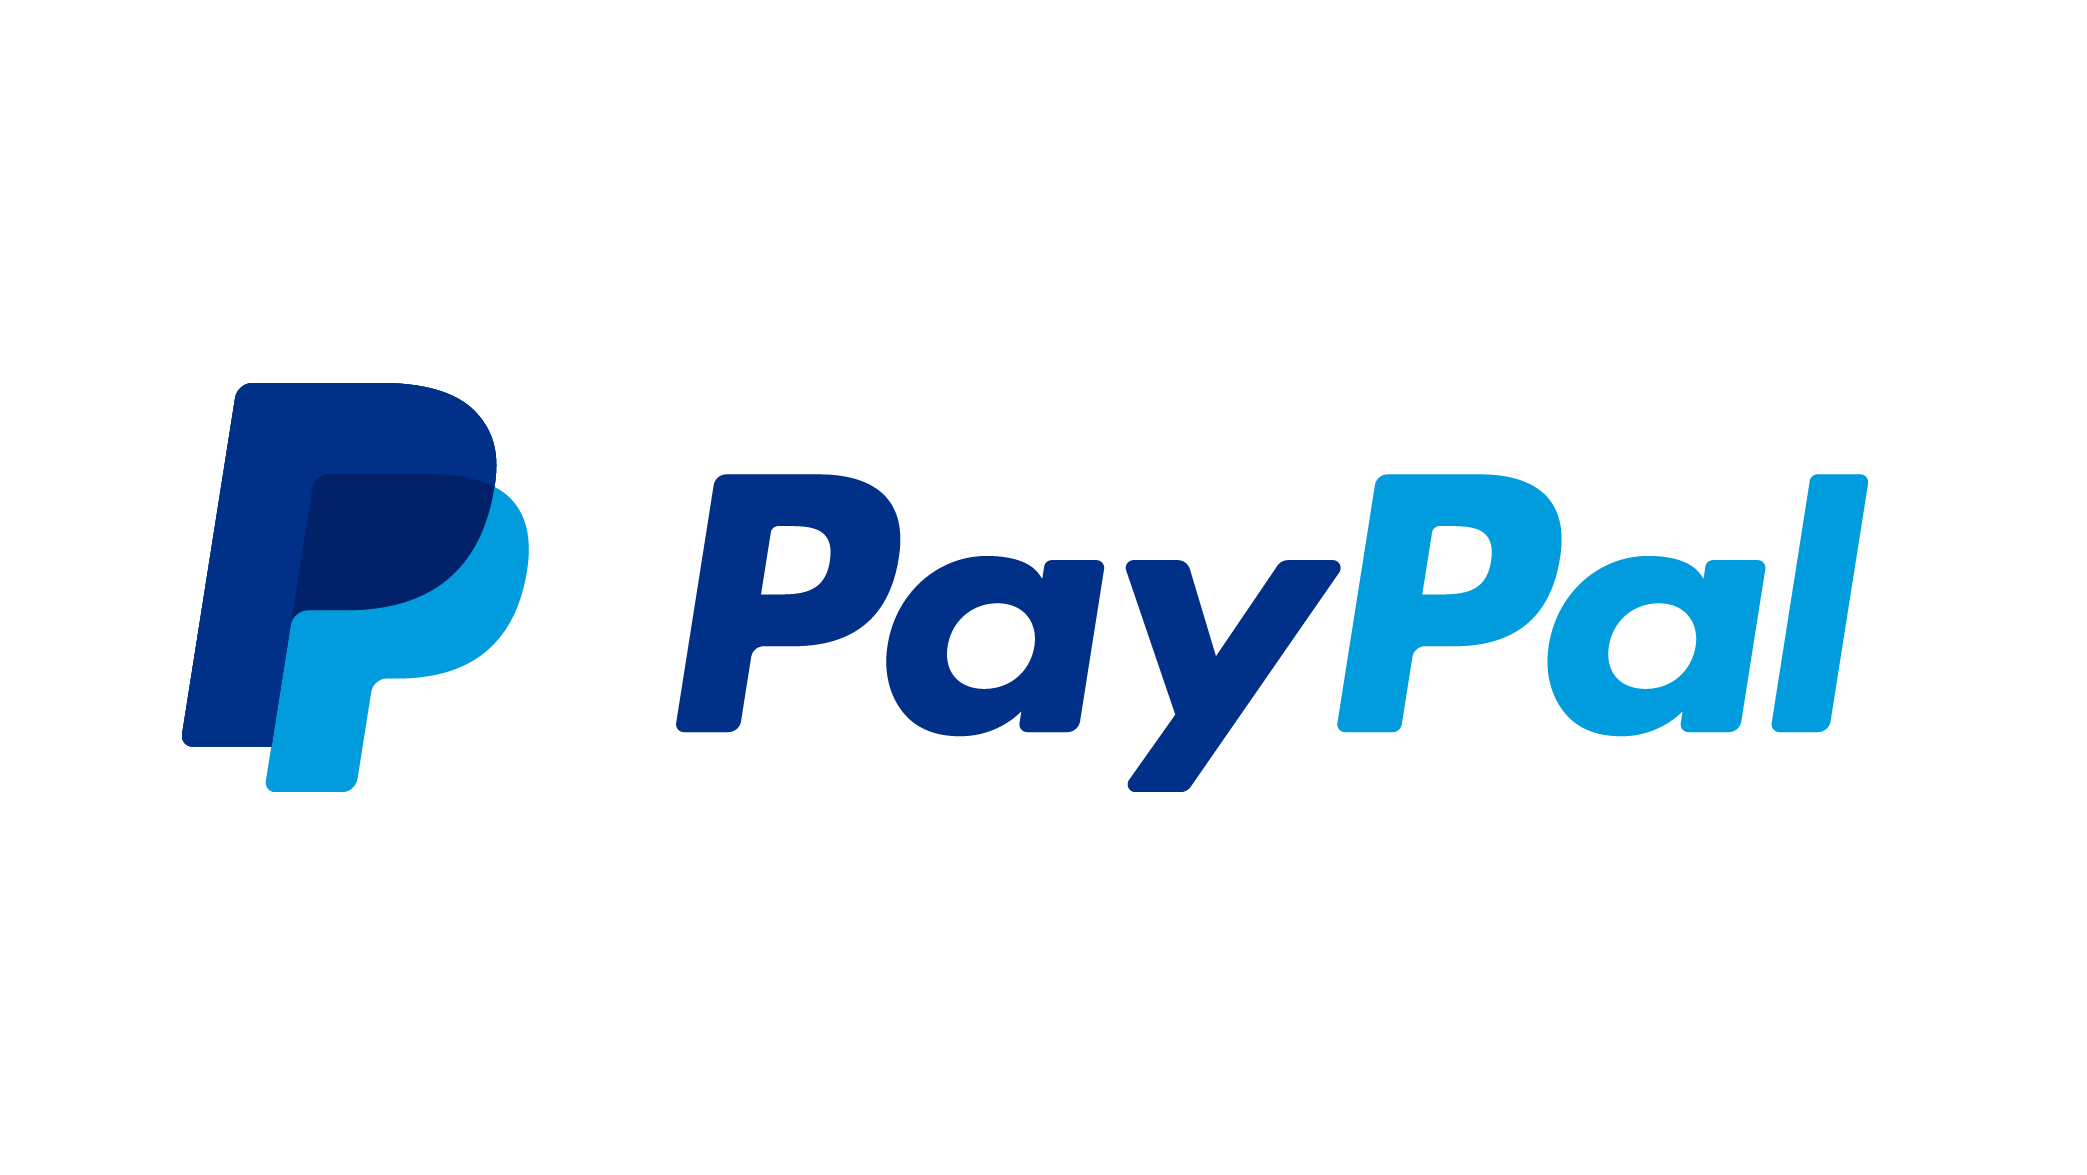 PayPal 로고